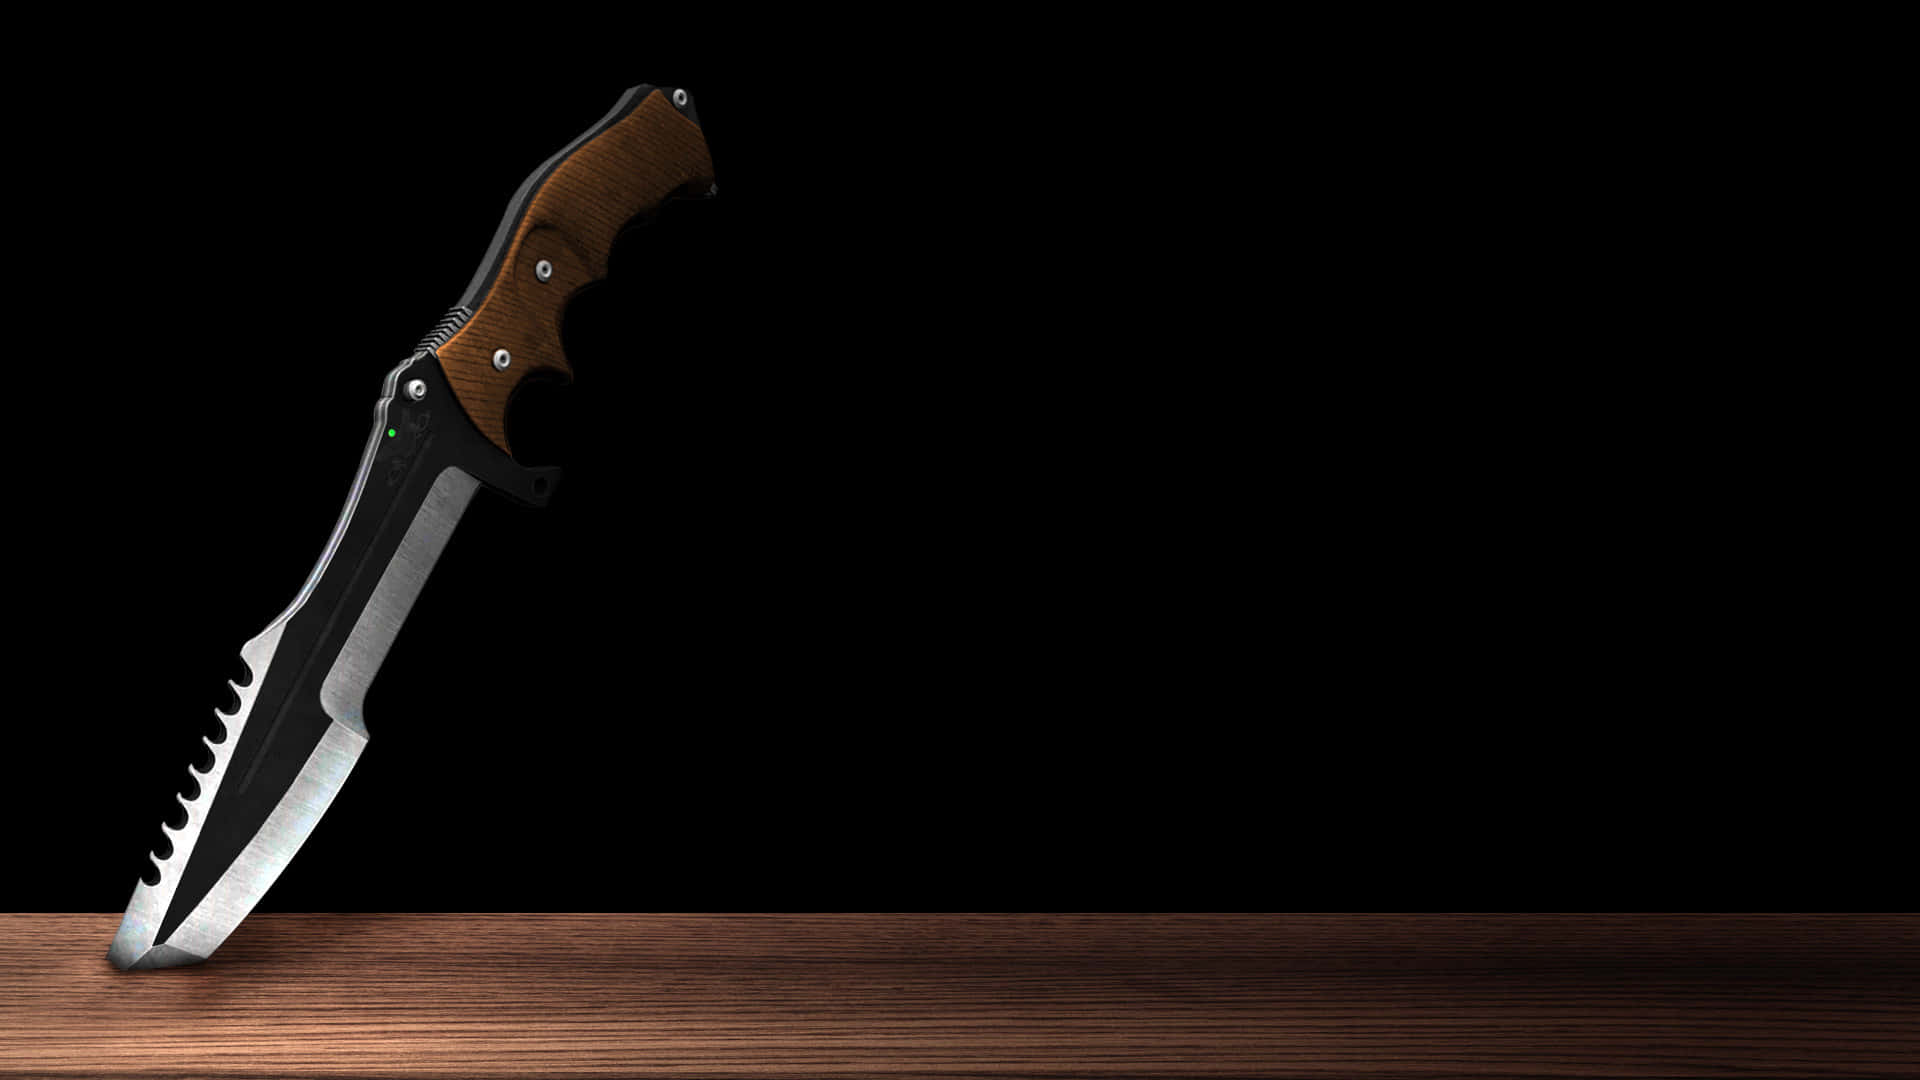 A Knife On A Wooden Table